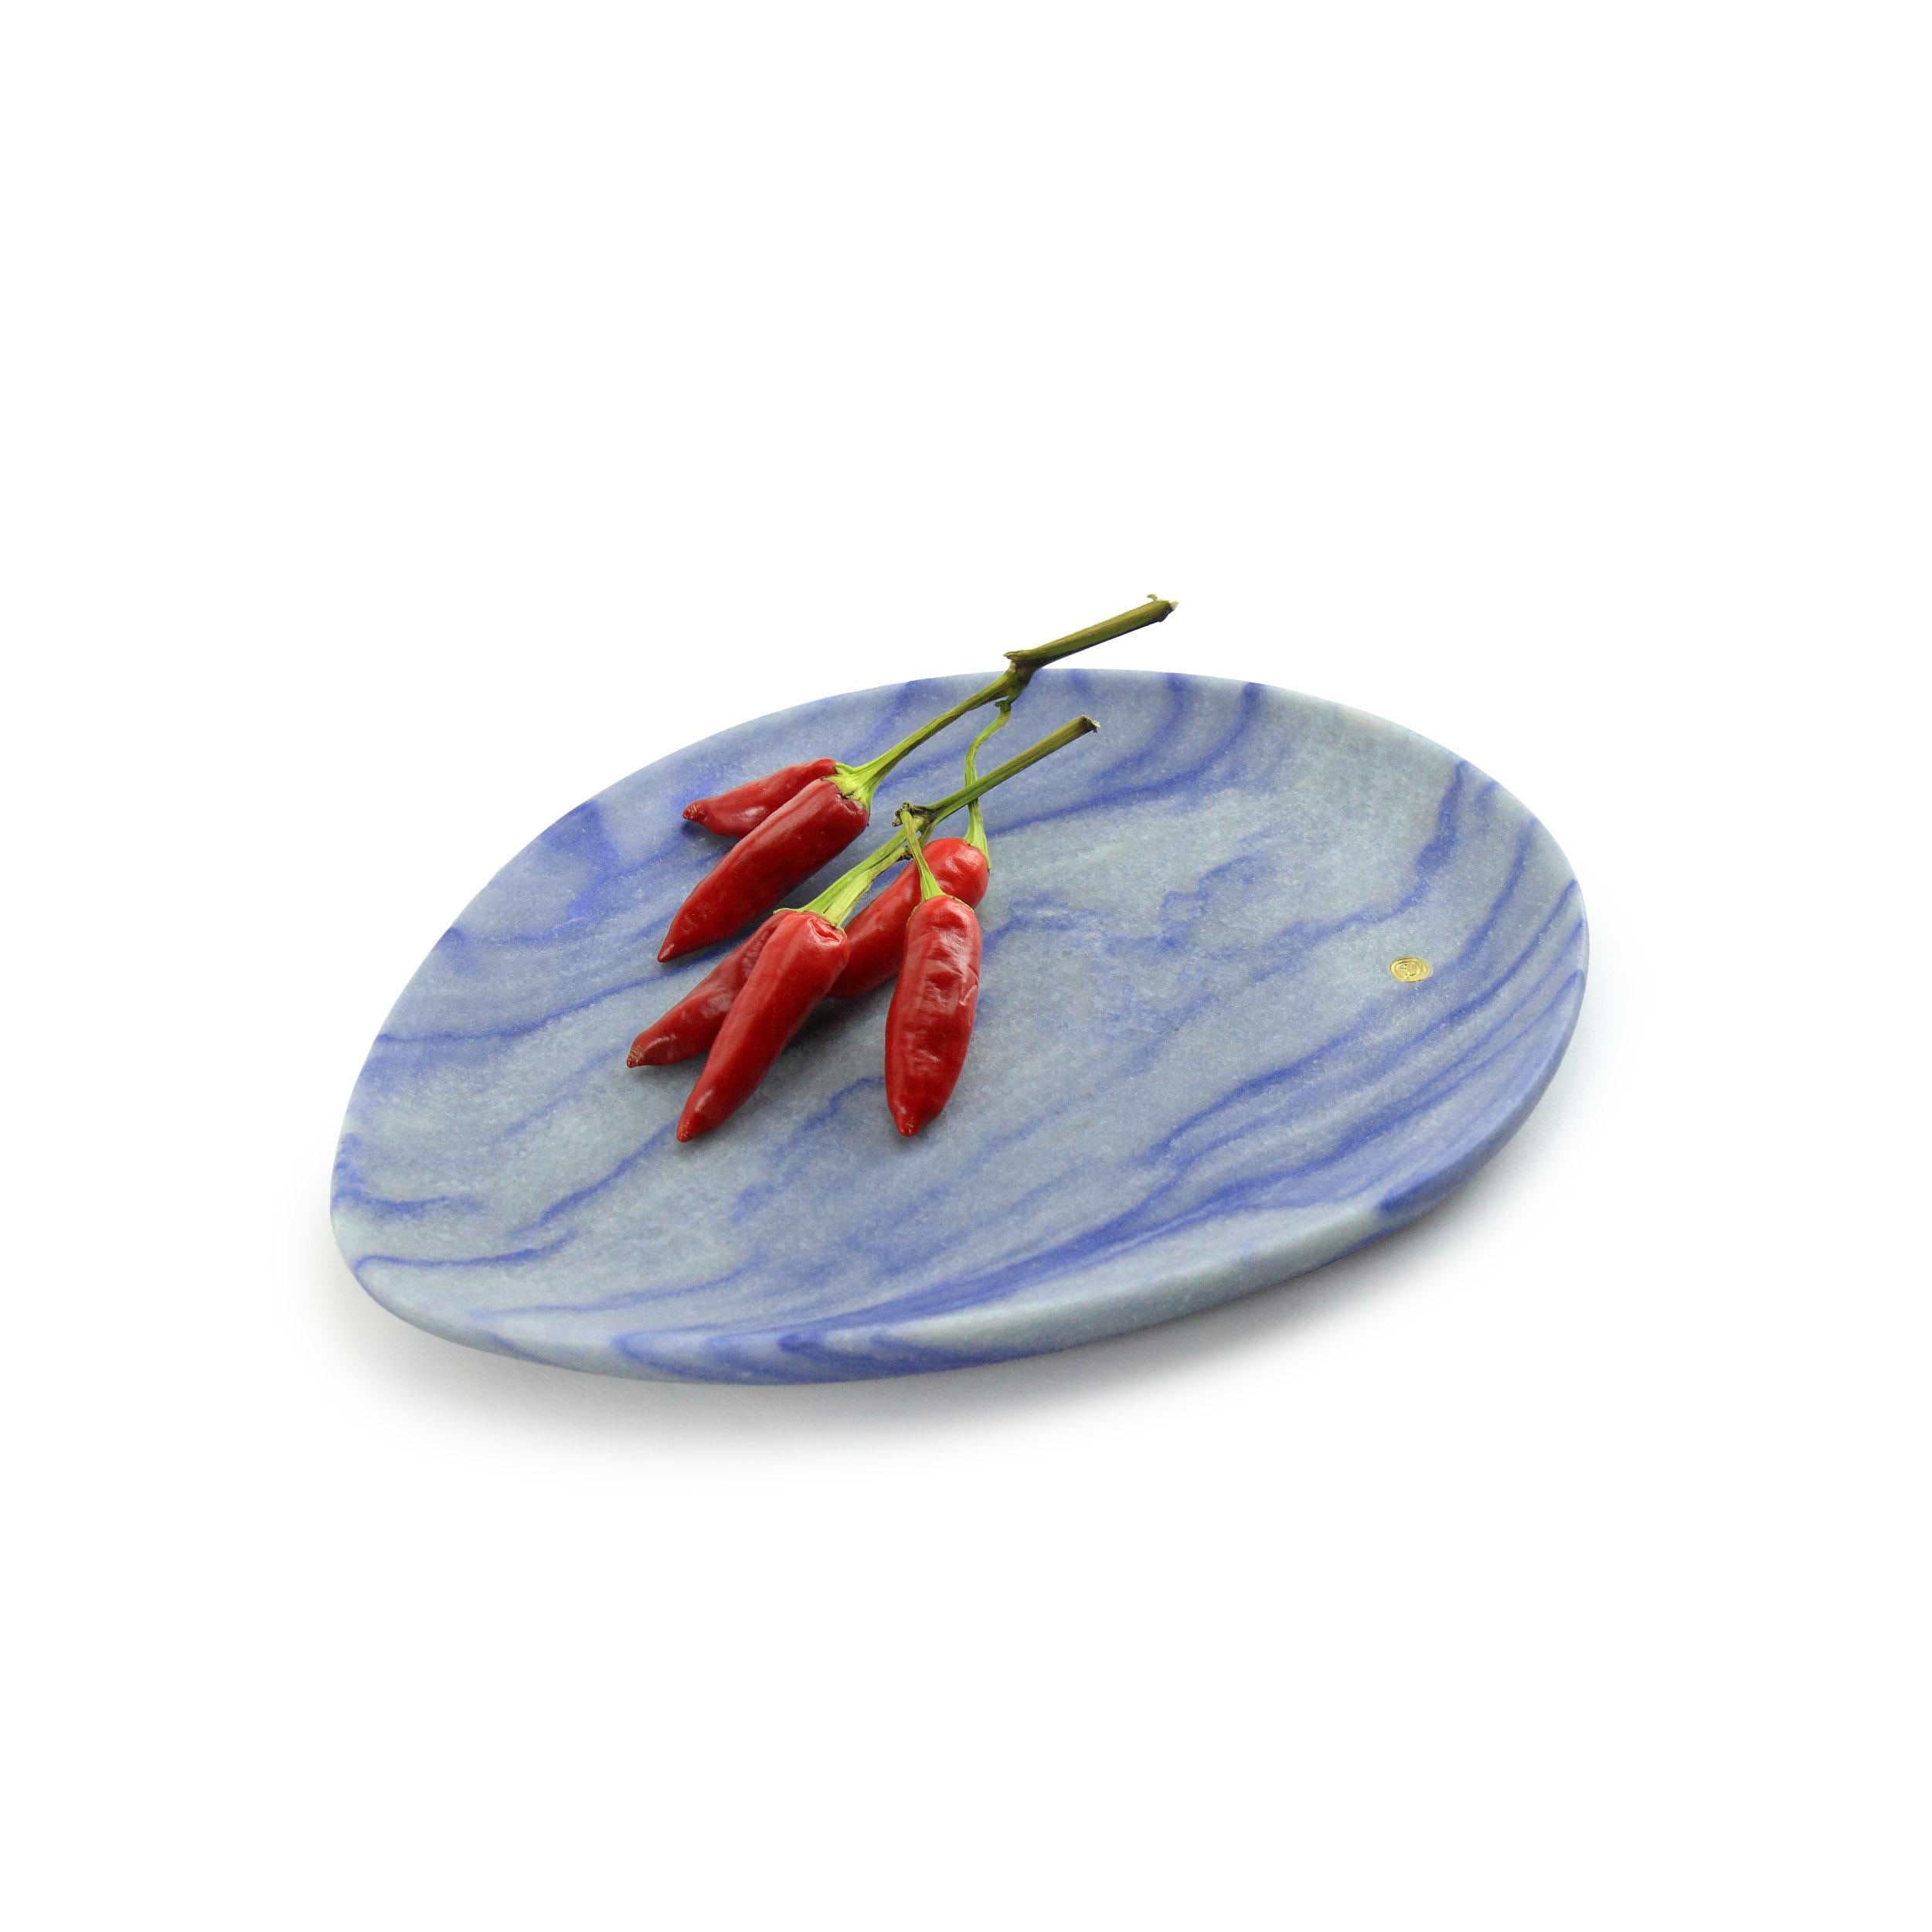 Hand carved presentation plate from semi-precious quartzite Azul Macaubas.
Multiple use as plates, platters and placers. 

Dimensions: Small L 24, W 20, H 1.8 cm, also available: Medium L 30, W 28, H 1.8 cm, big L 36, W 35, H 1.8 cm.
Available in